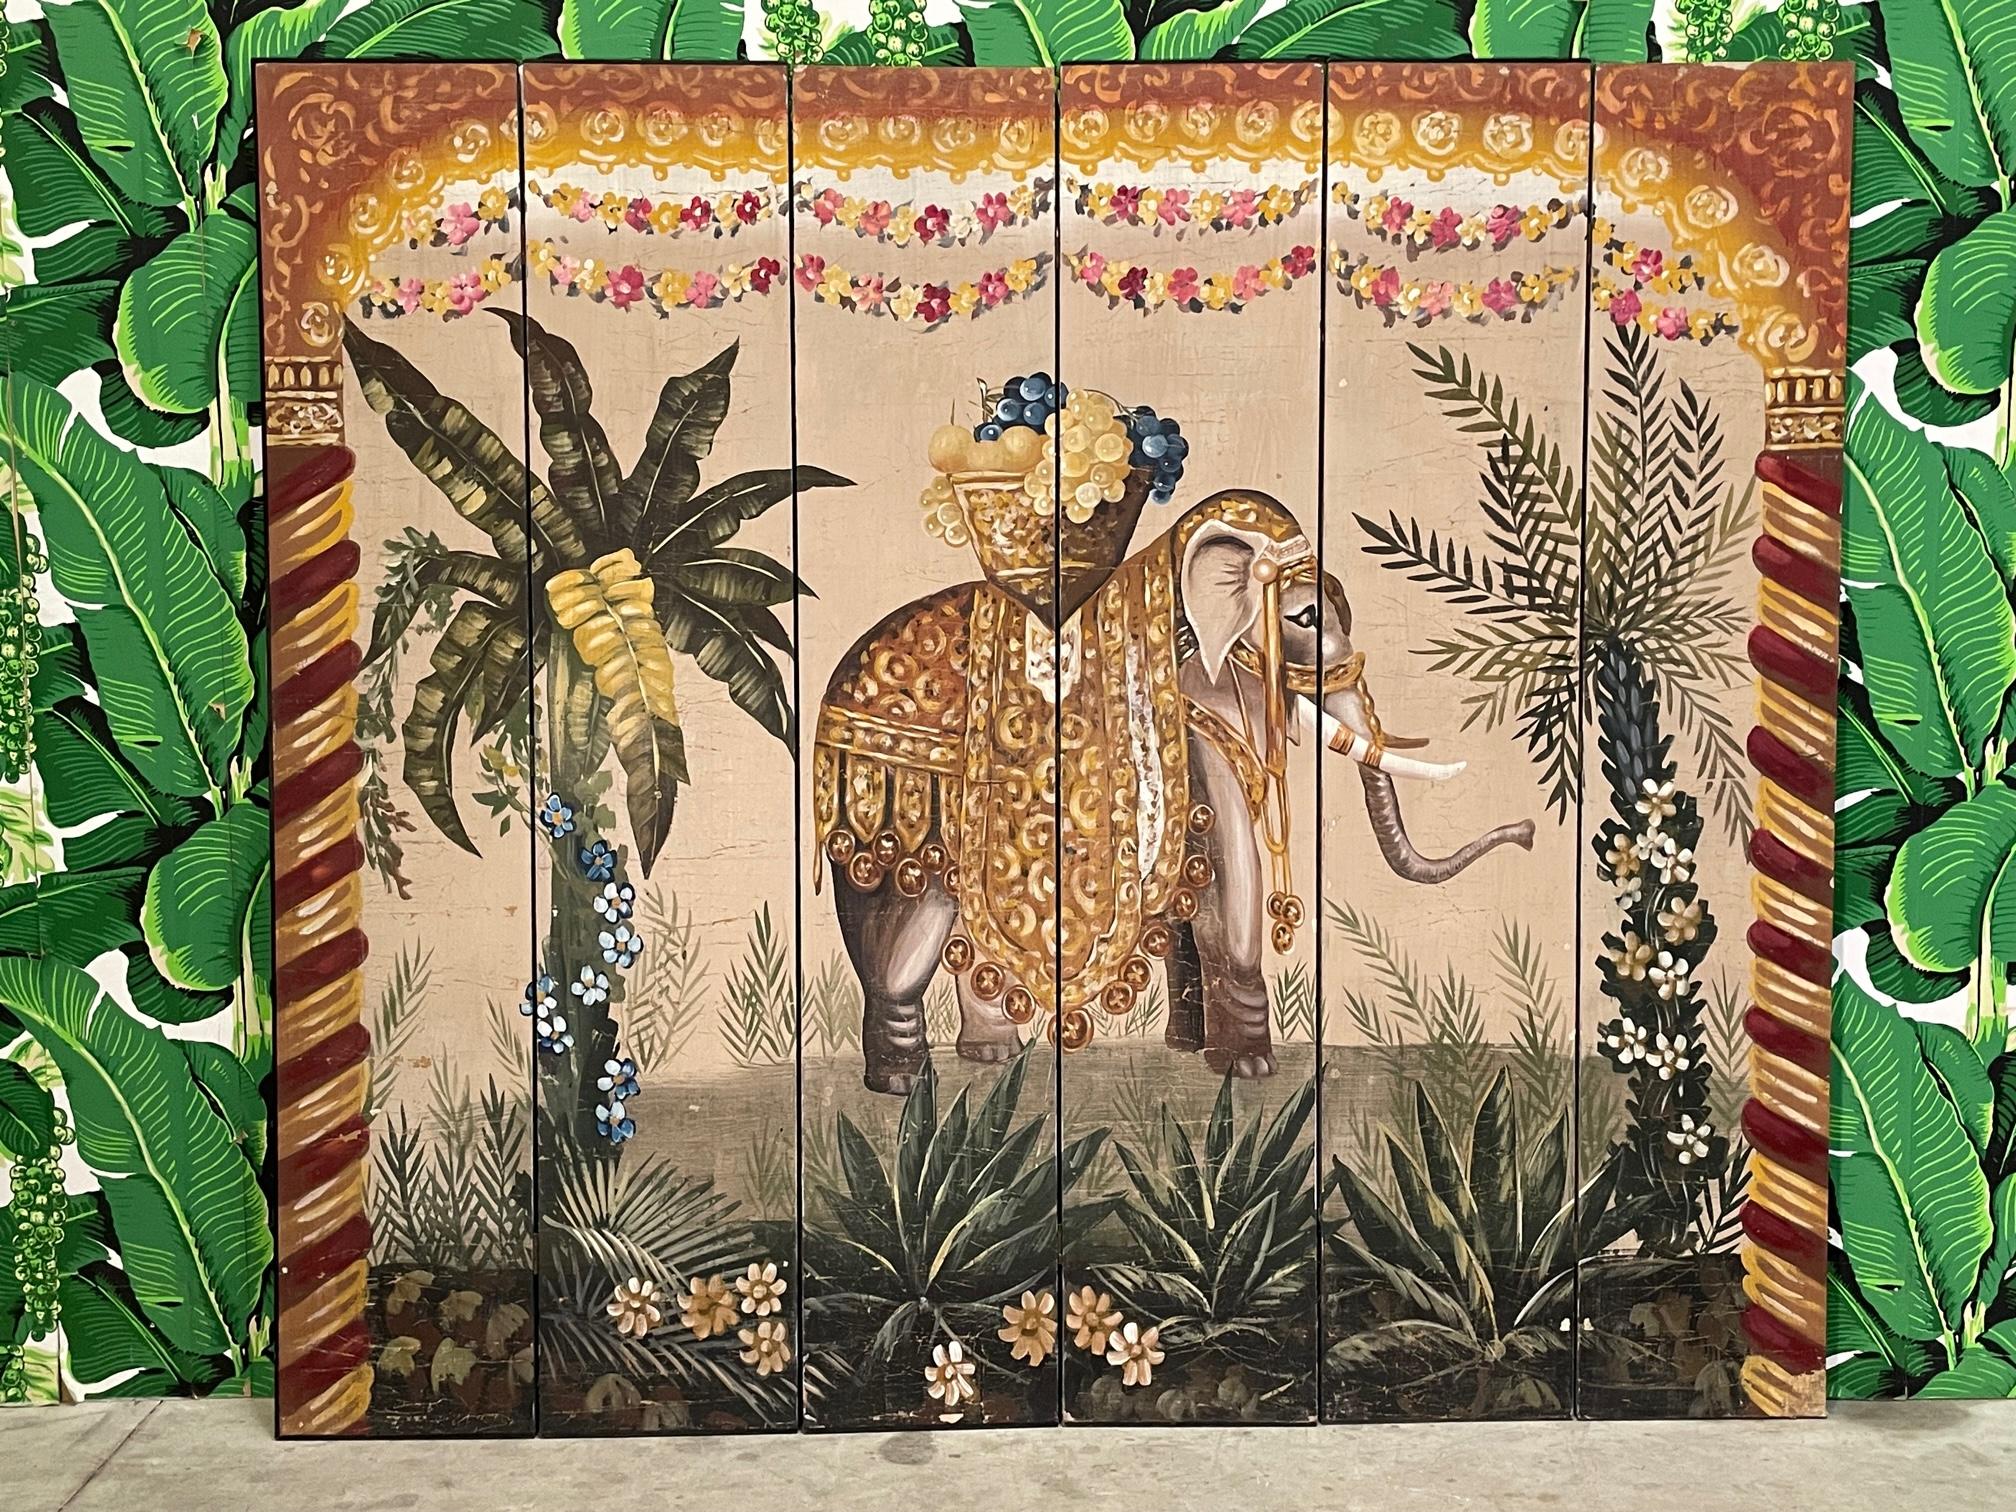 Early to mid-century era six panel folding screen features a hand painted scene depicting an elephant in full regalia as well as palm trees, flowers, and twisted columns. Believed to be Indian or East Asian in origin. Good vintage condition with